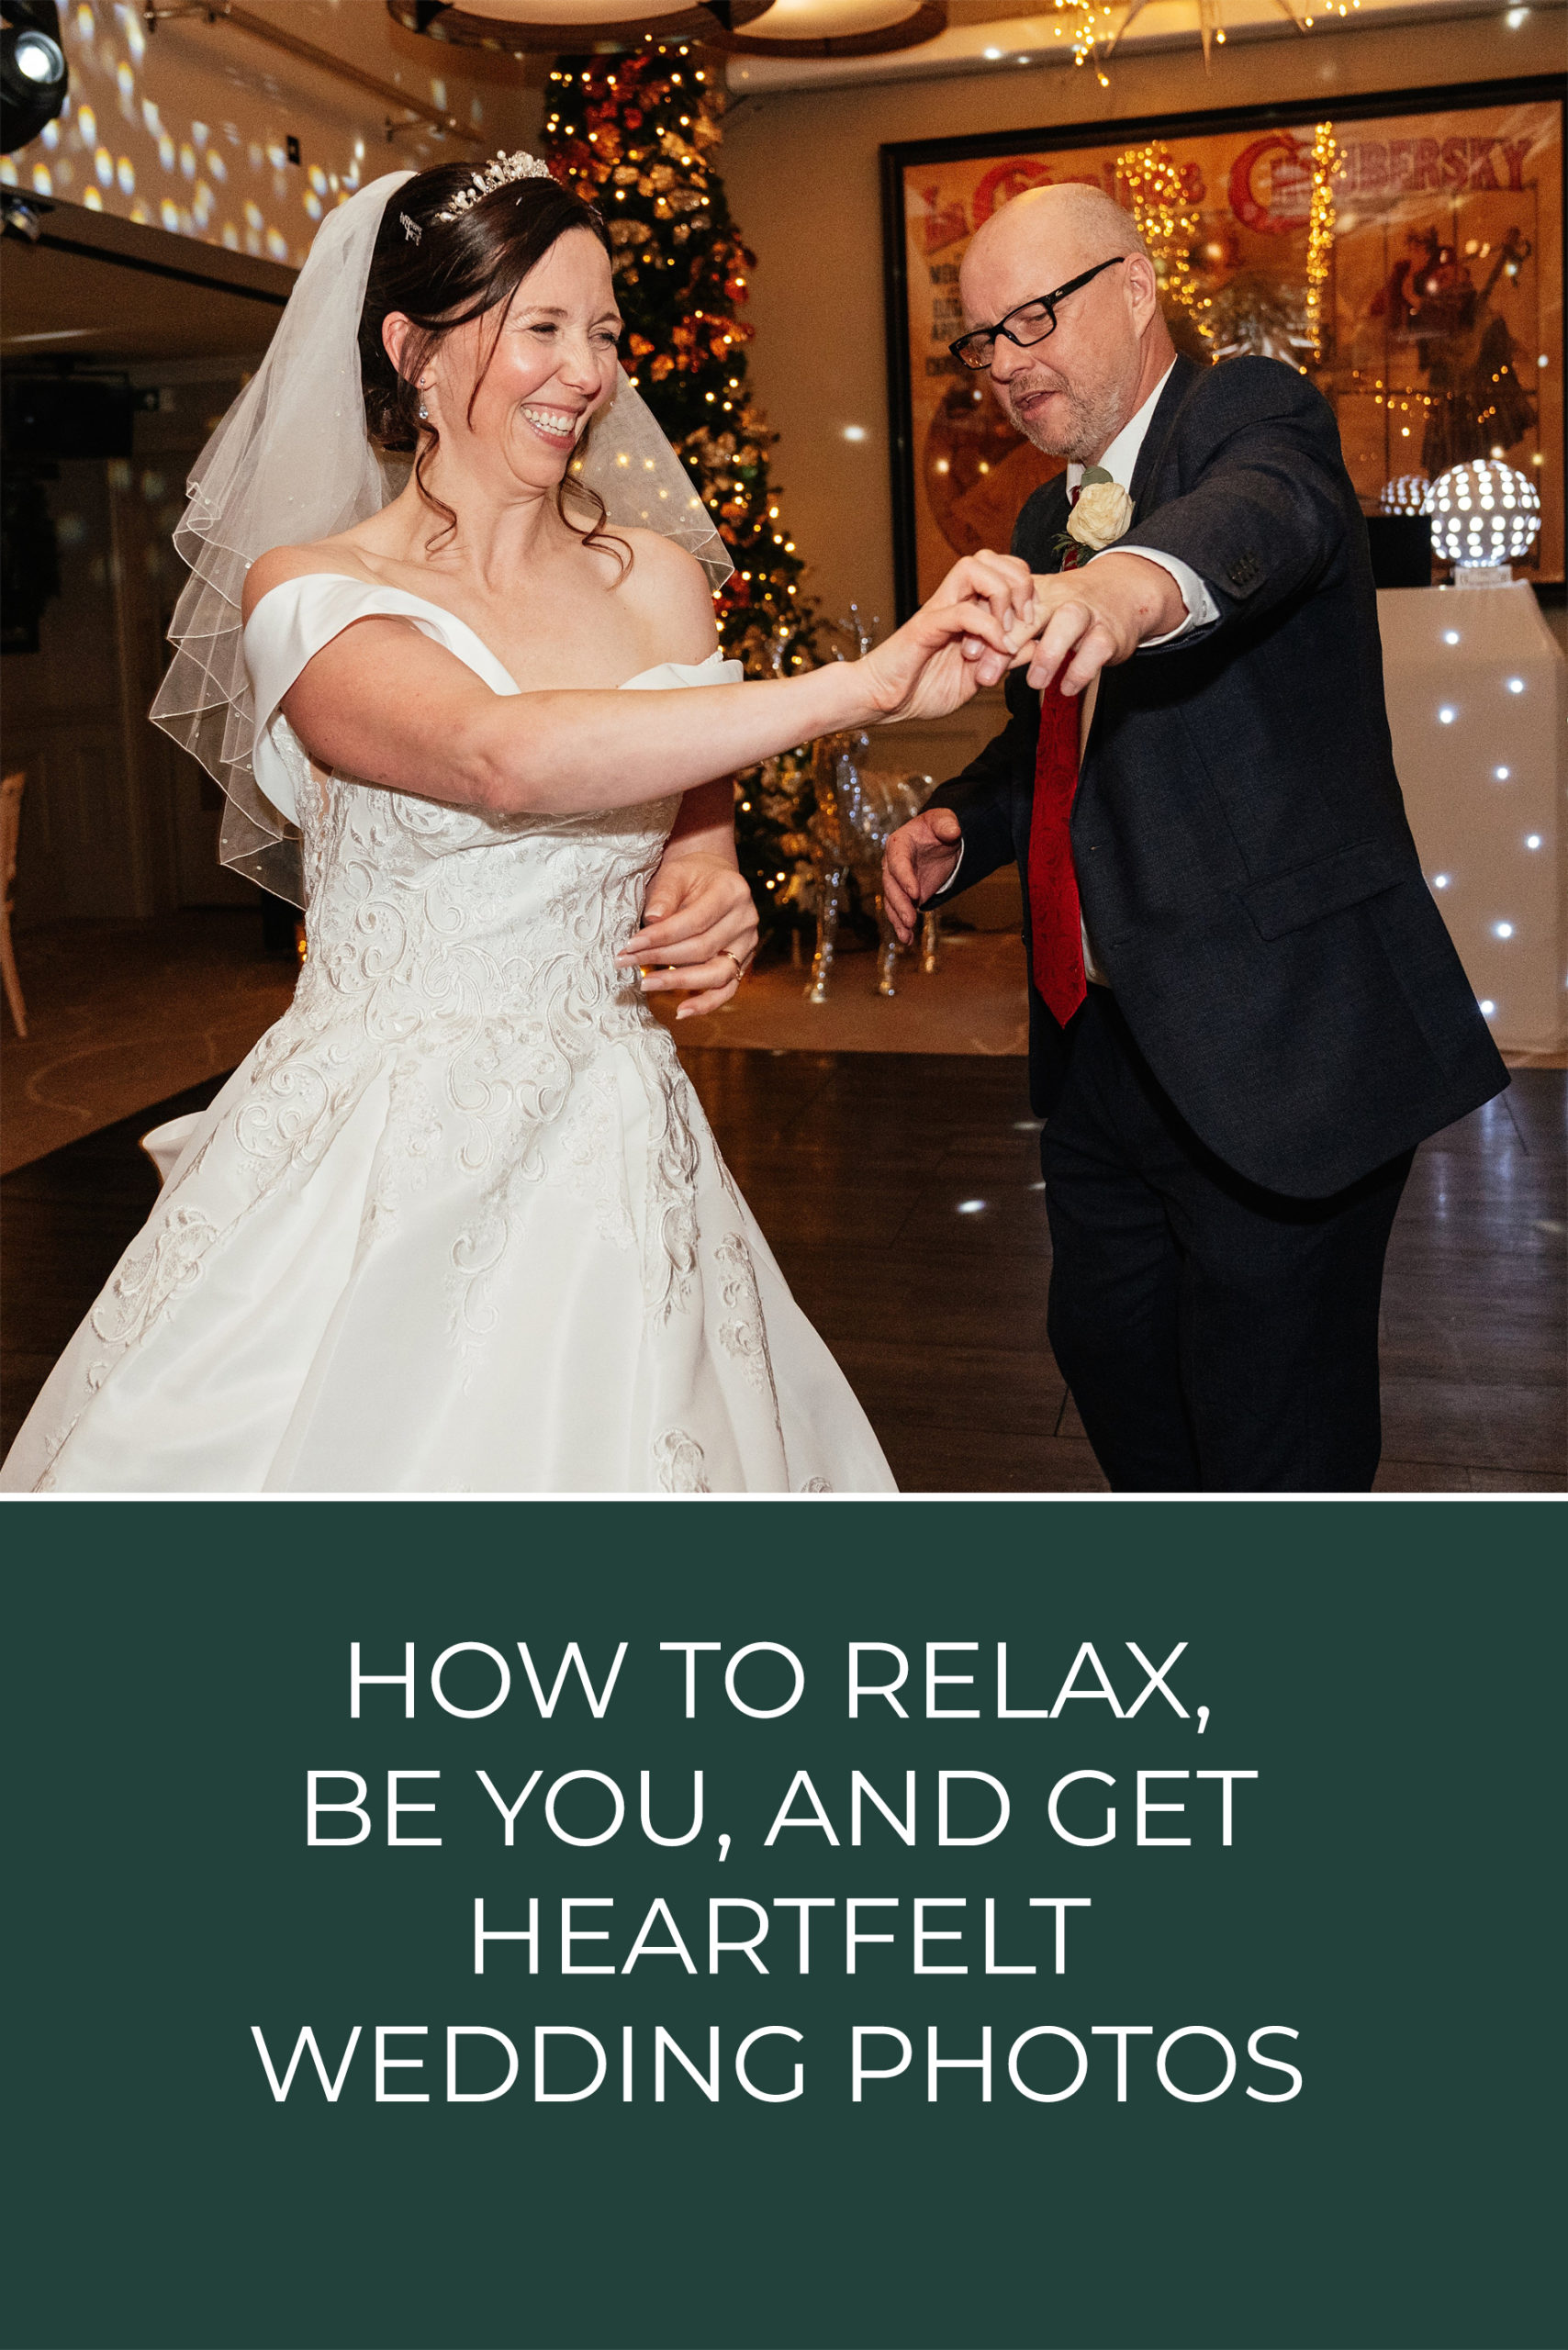 How to relax be you and get heartfelt wedding photos